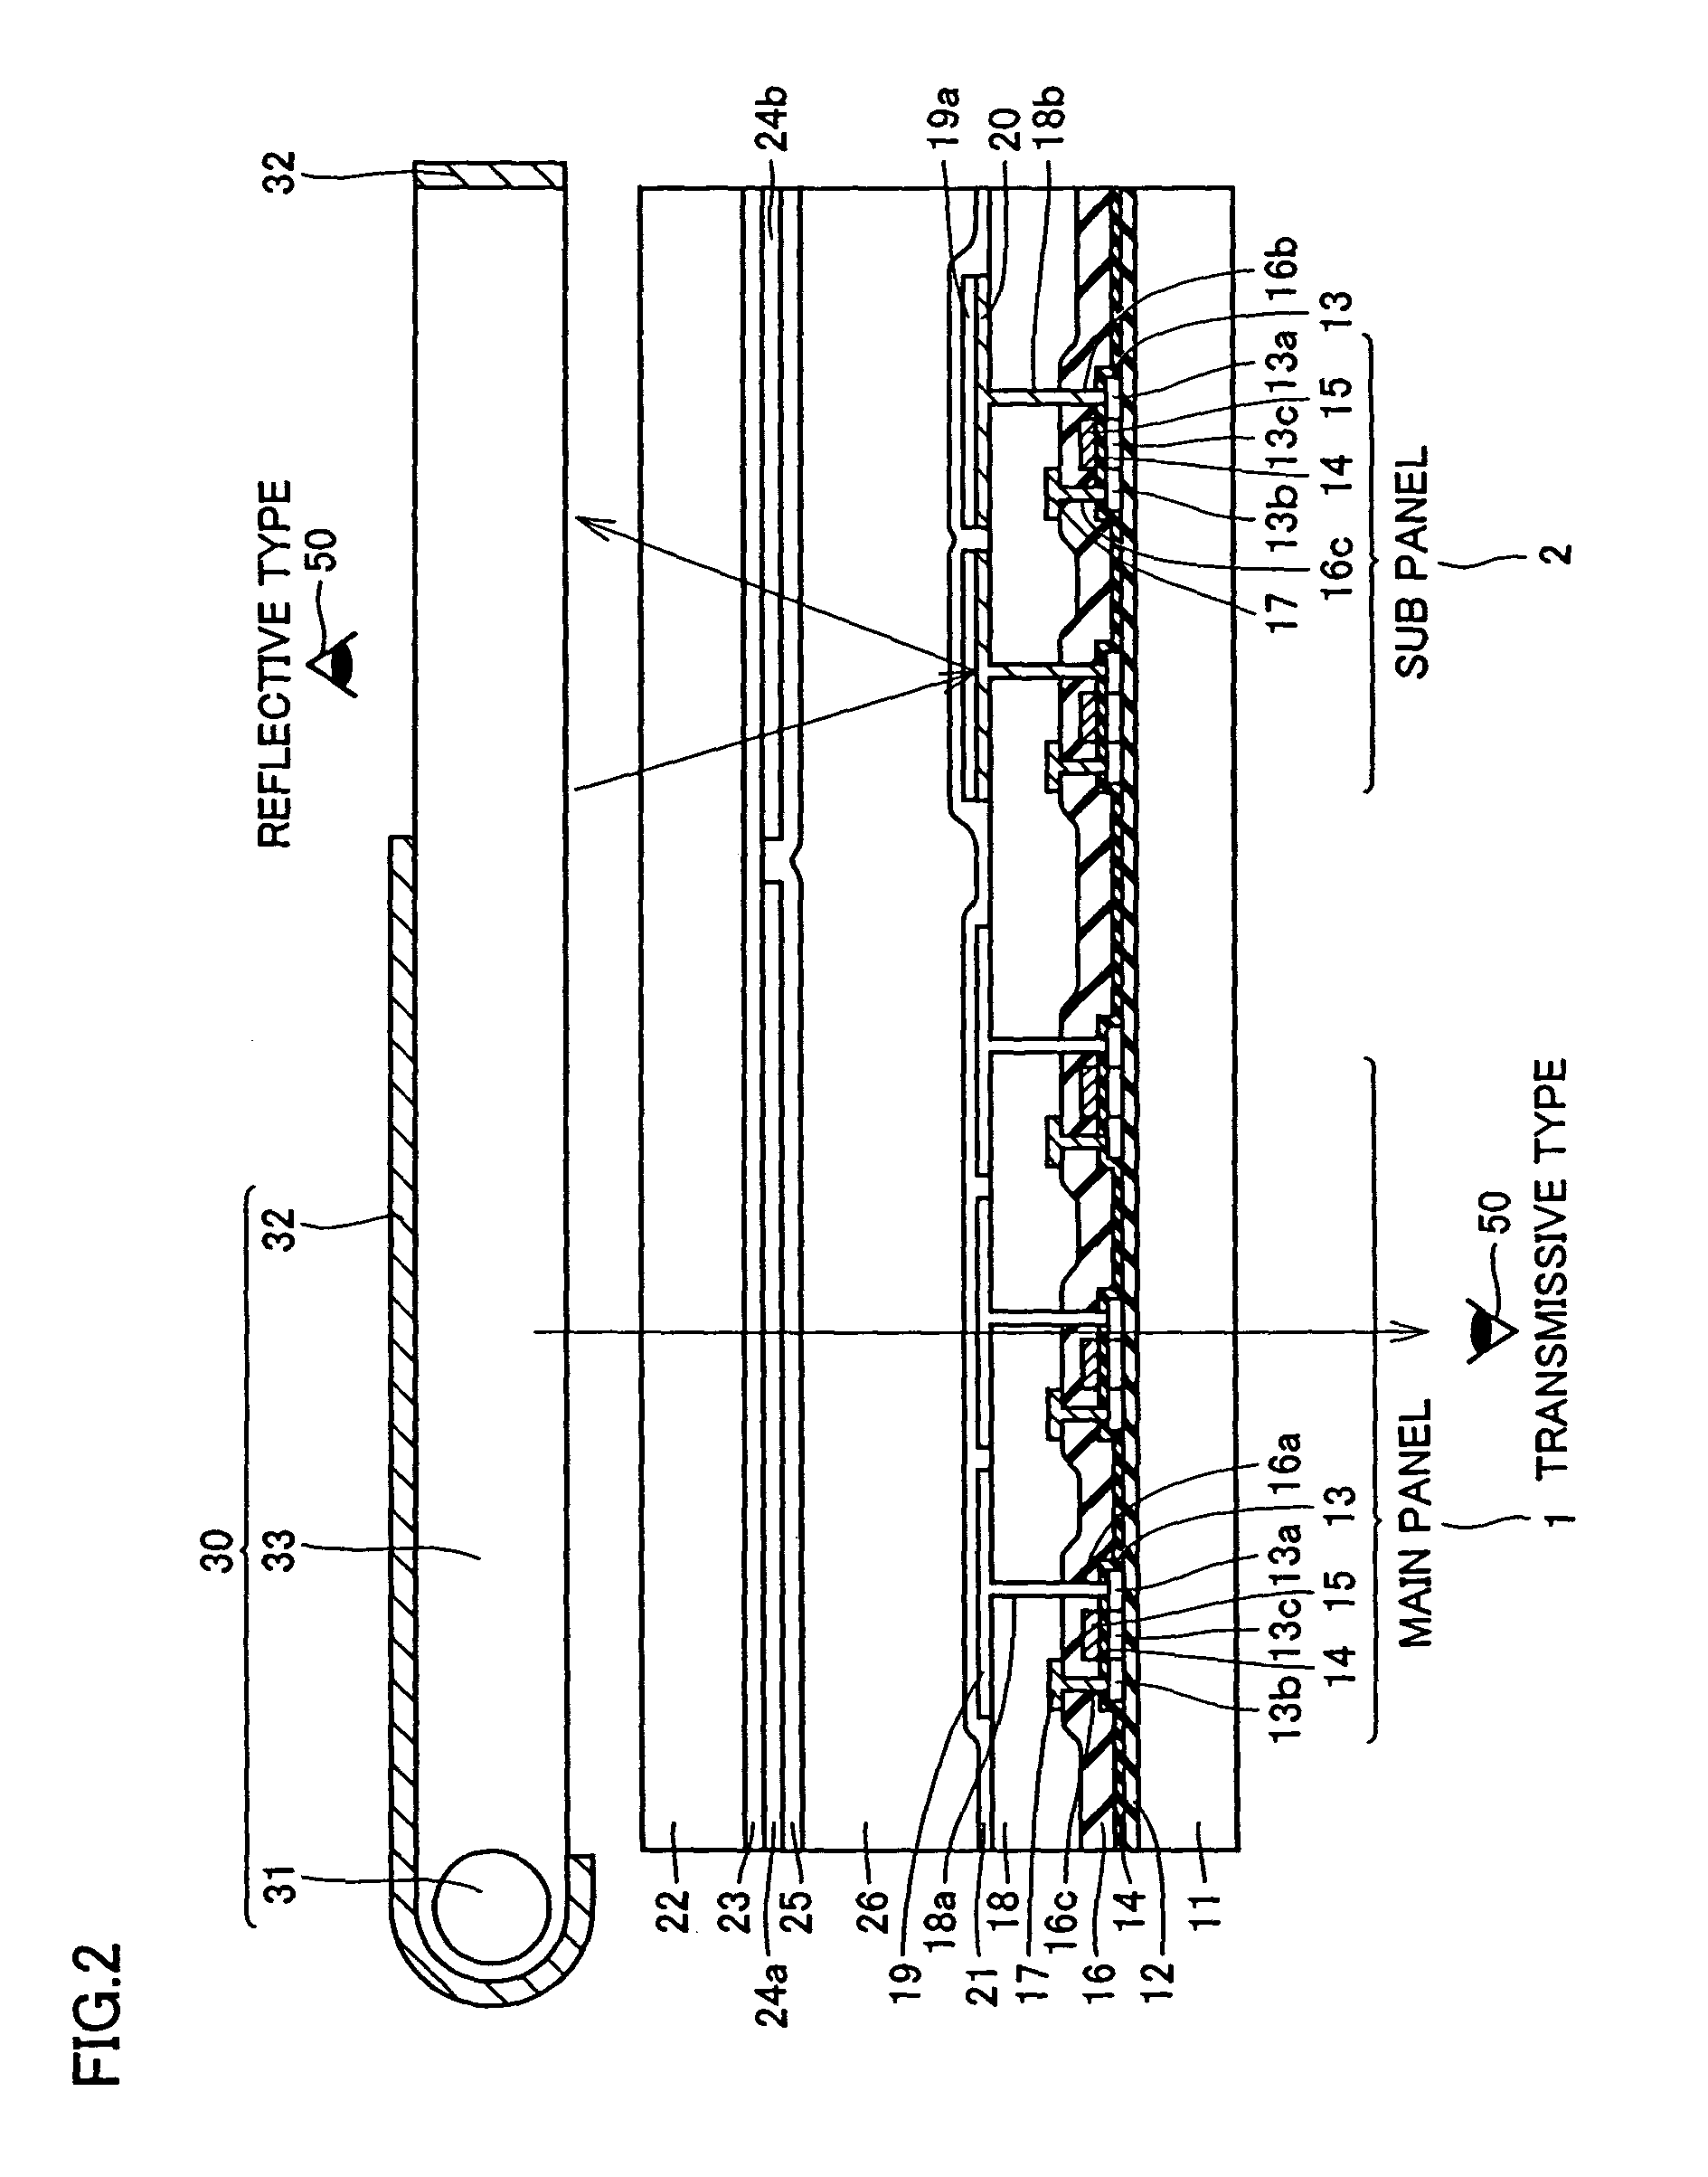 Display including a plurality of display panels